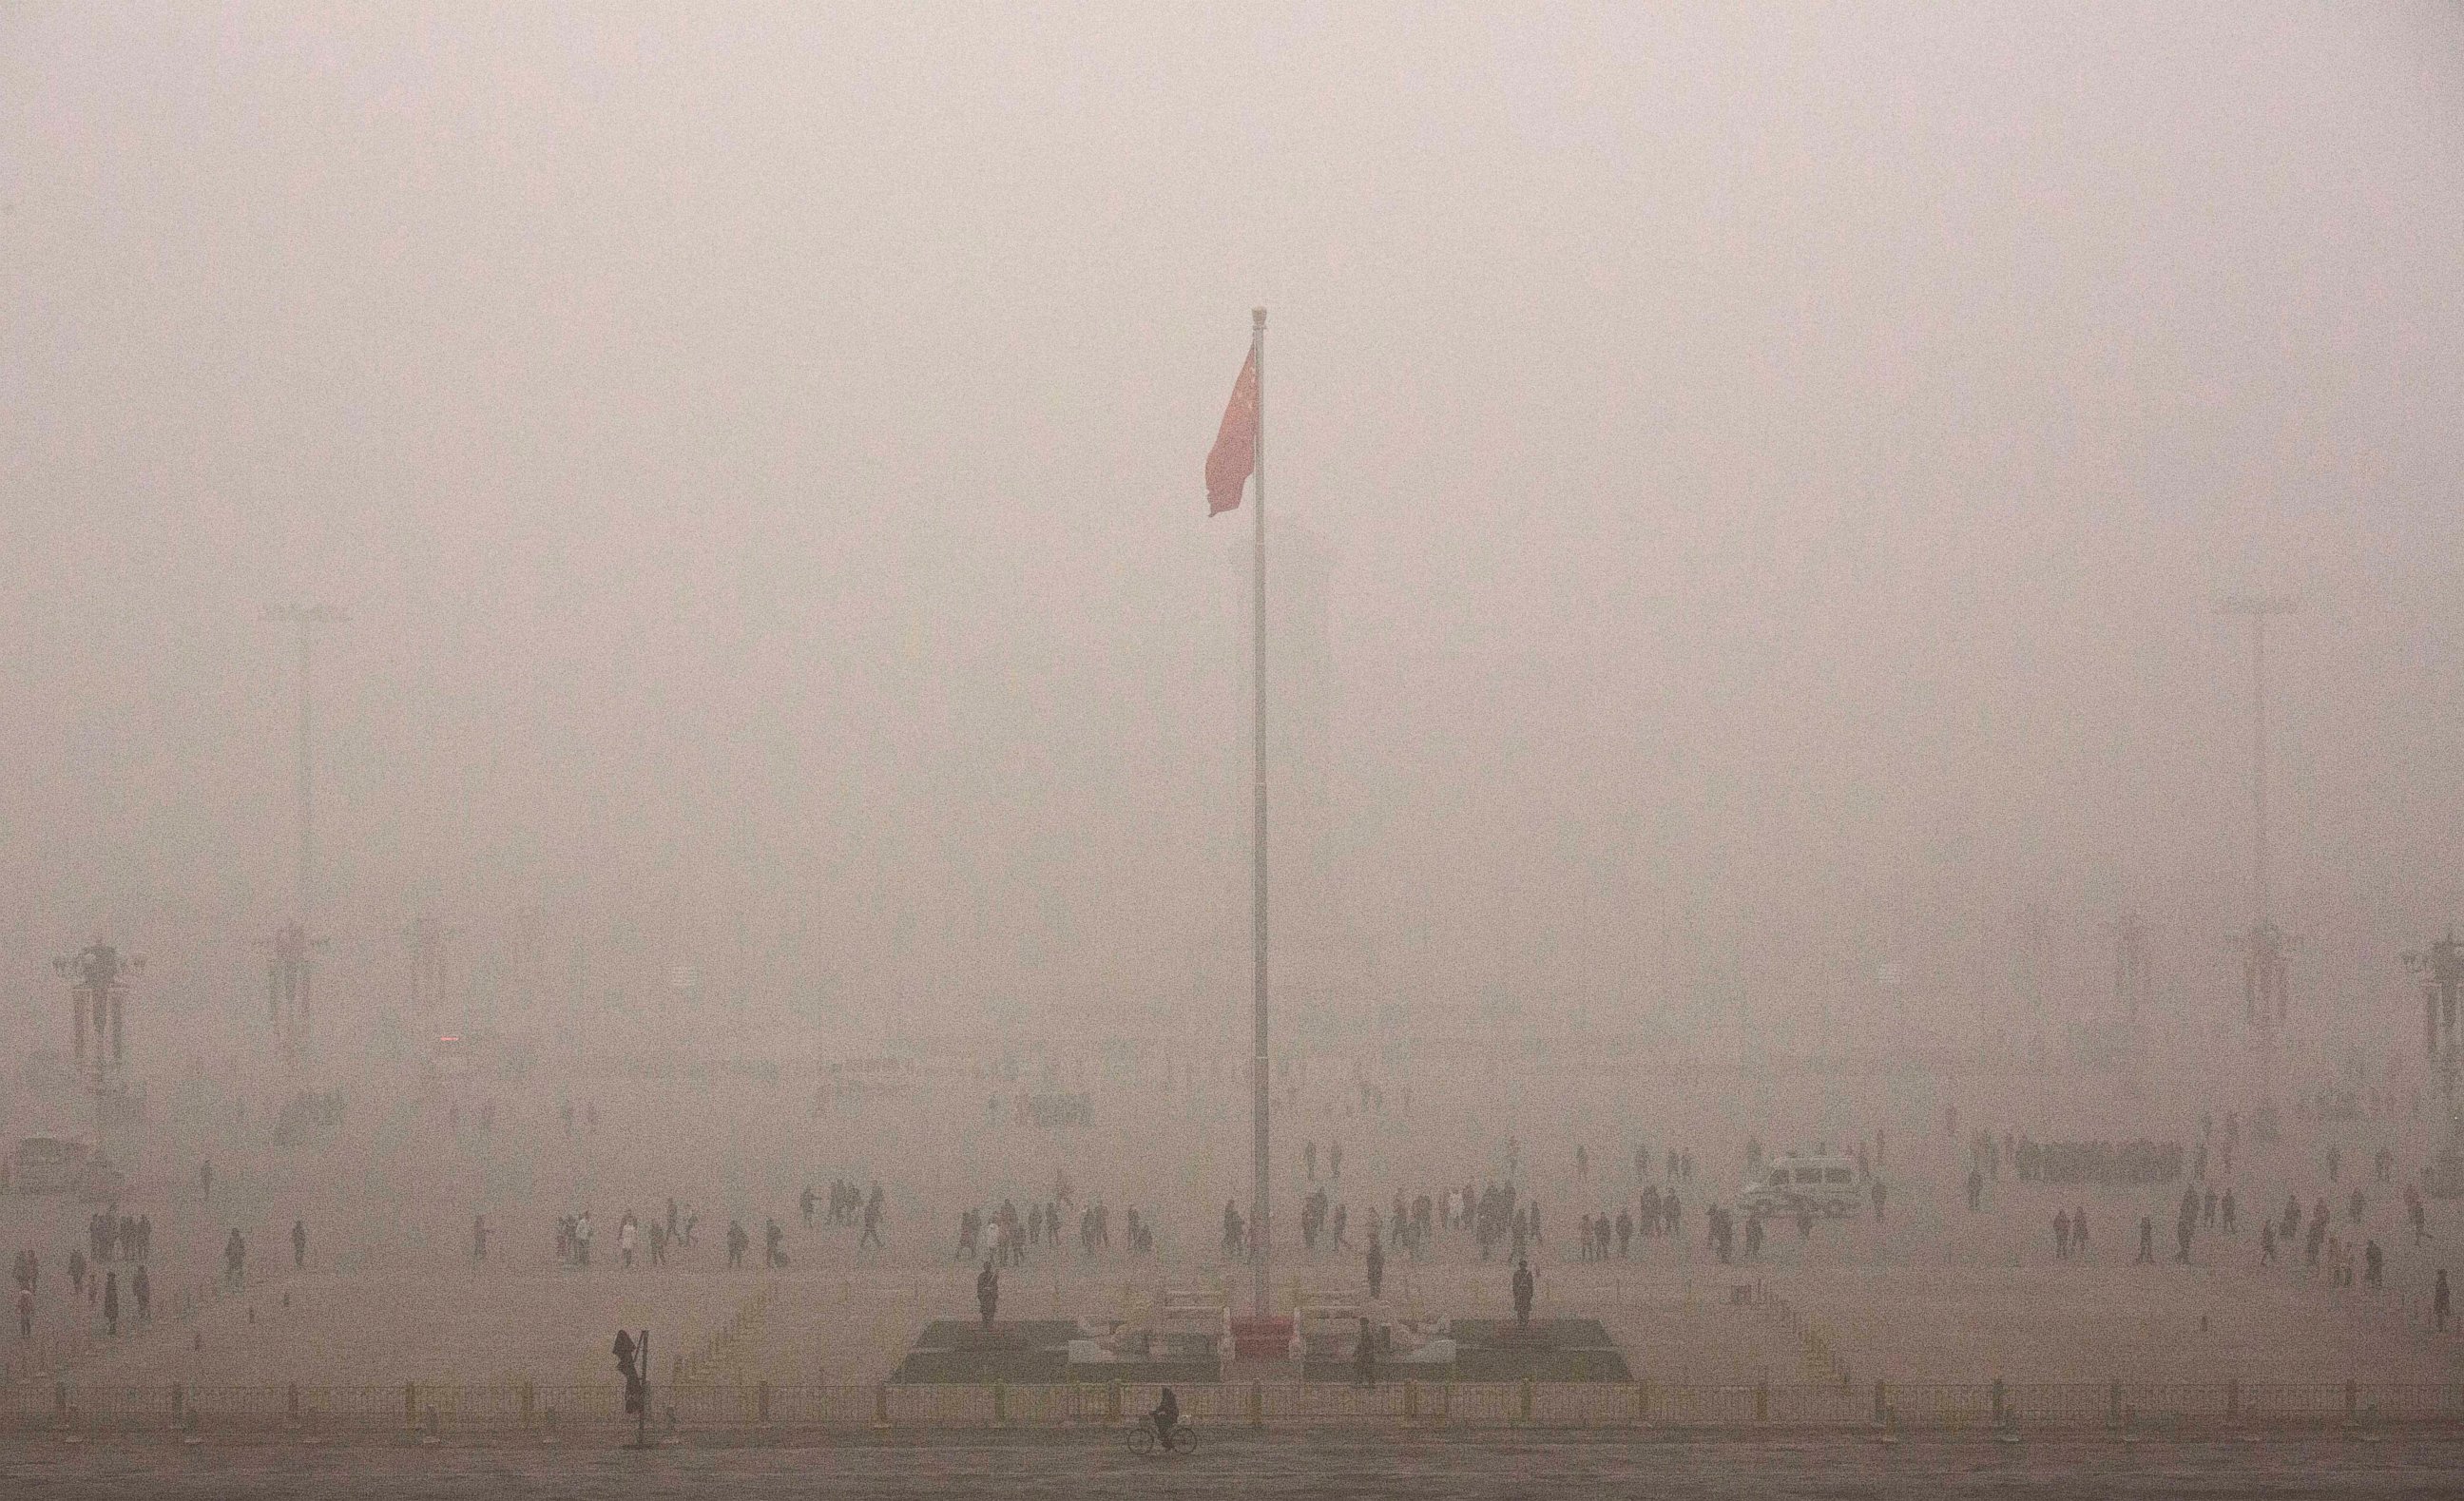 PHOTO: Tiananmen Square is seen in heavy smog on a day of high pollution on Dec. 1, 2015 in Beijing, China.